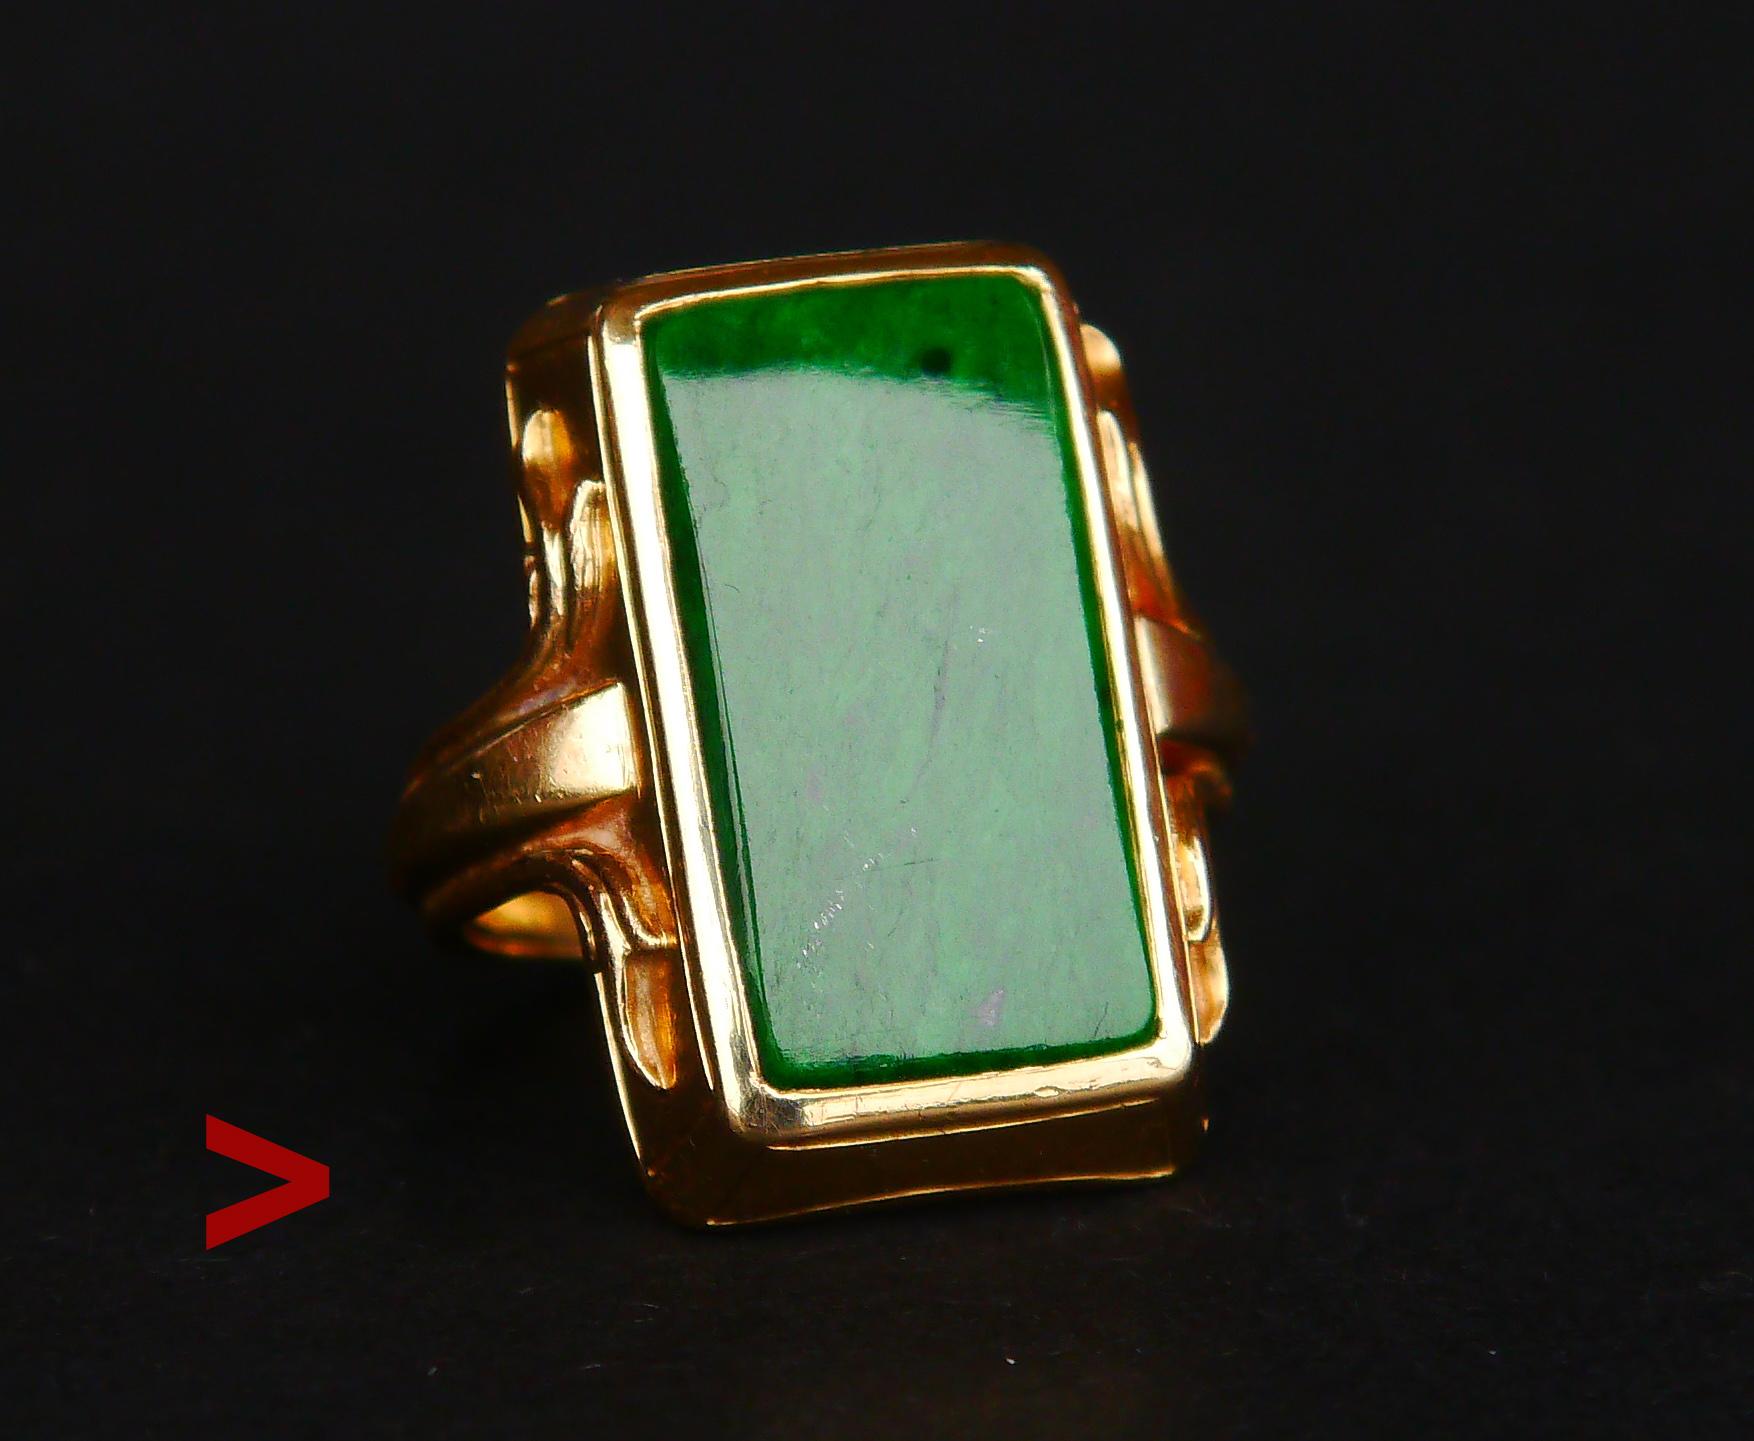 Nice Art Deco Ring with bezel set plate of vibrant deep Green high grade untreated Jade Stone, faceted baguette cut 18 mm x 9 mm / ca. 15 ct .

Swedish hallmarks of jewelry workshop ,Stockholm, 18K. Year marks P8 = handmade in 1941.

Crown is 22 mm